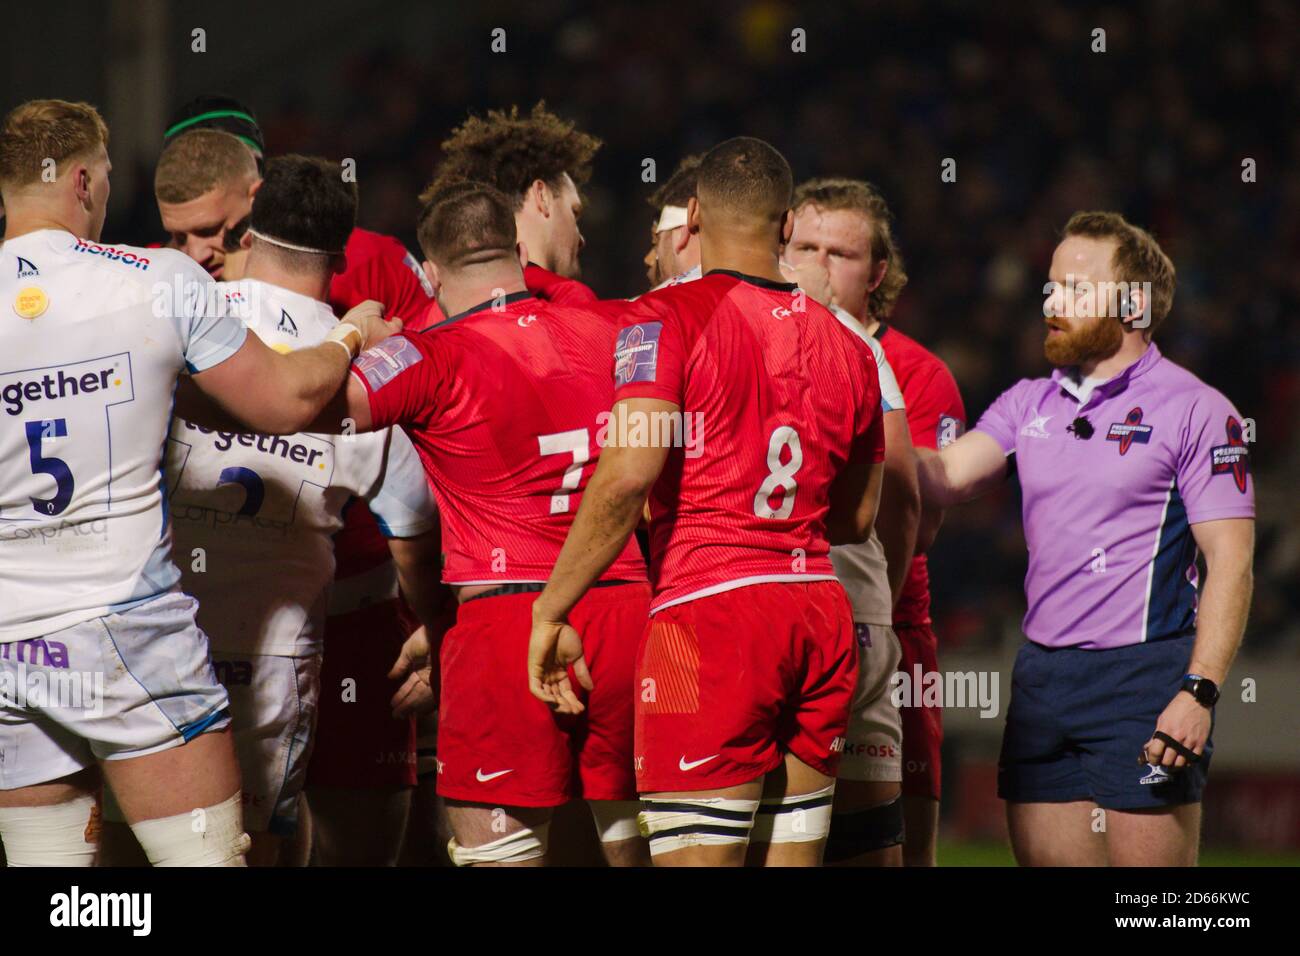 Manchester, England, 7 February 2020. Gallagher Premiership referee Hamish Smales separating players from Sale Sharks and Saracens during the Gallagher Premiership Cup semi final at the A J Bell Stadium. Stock Photo